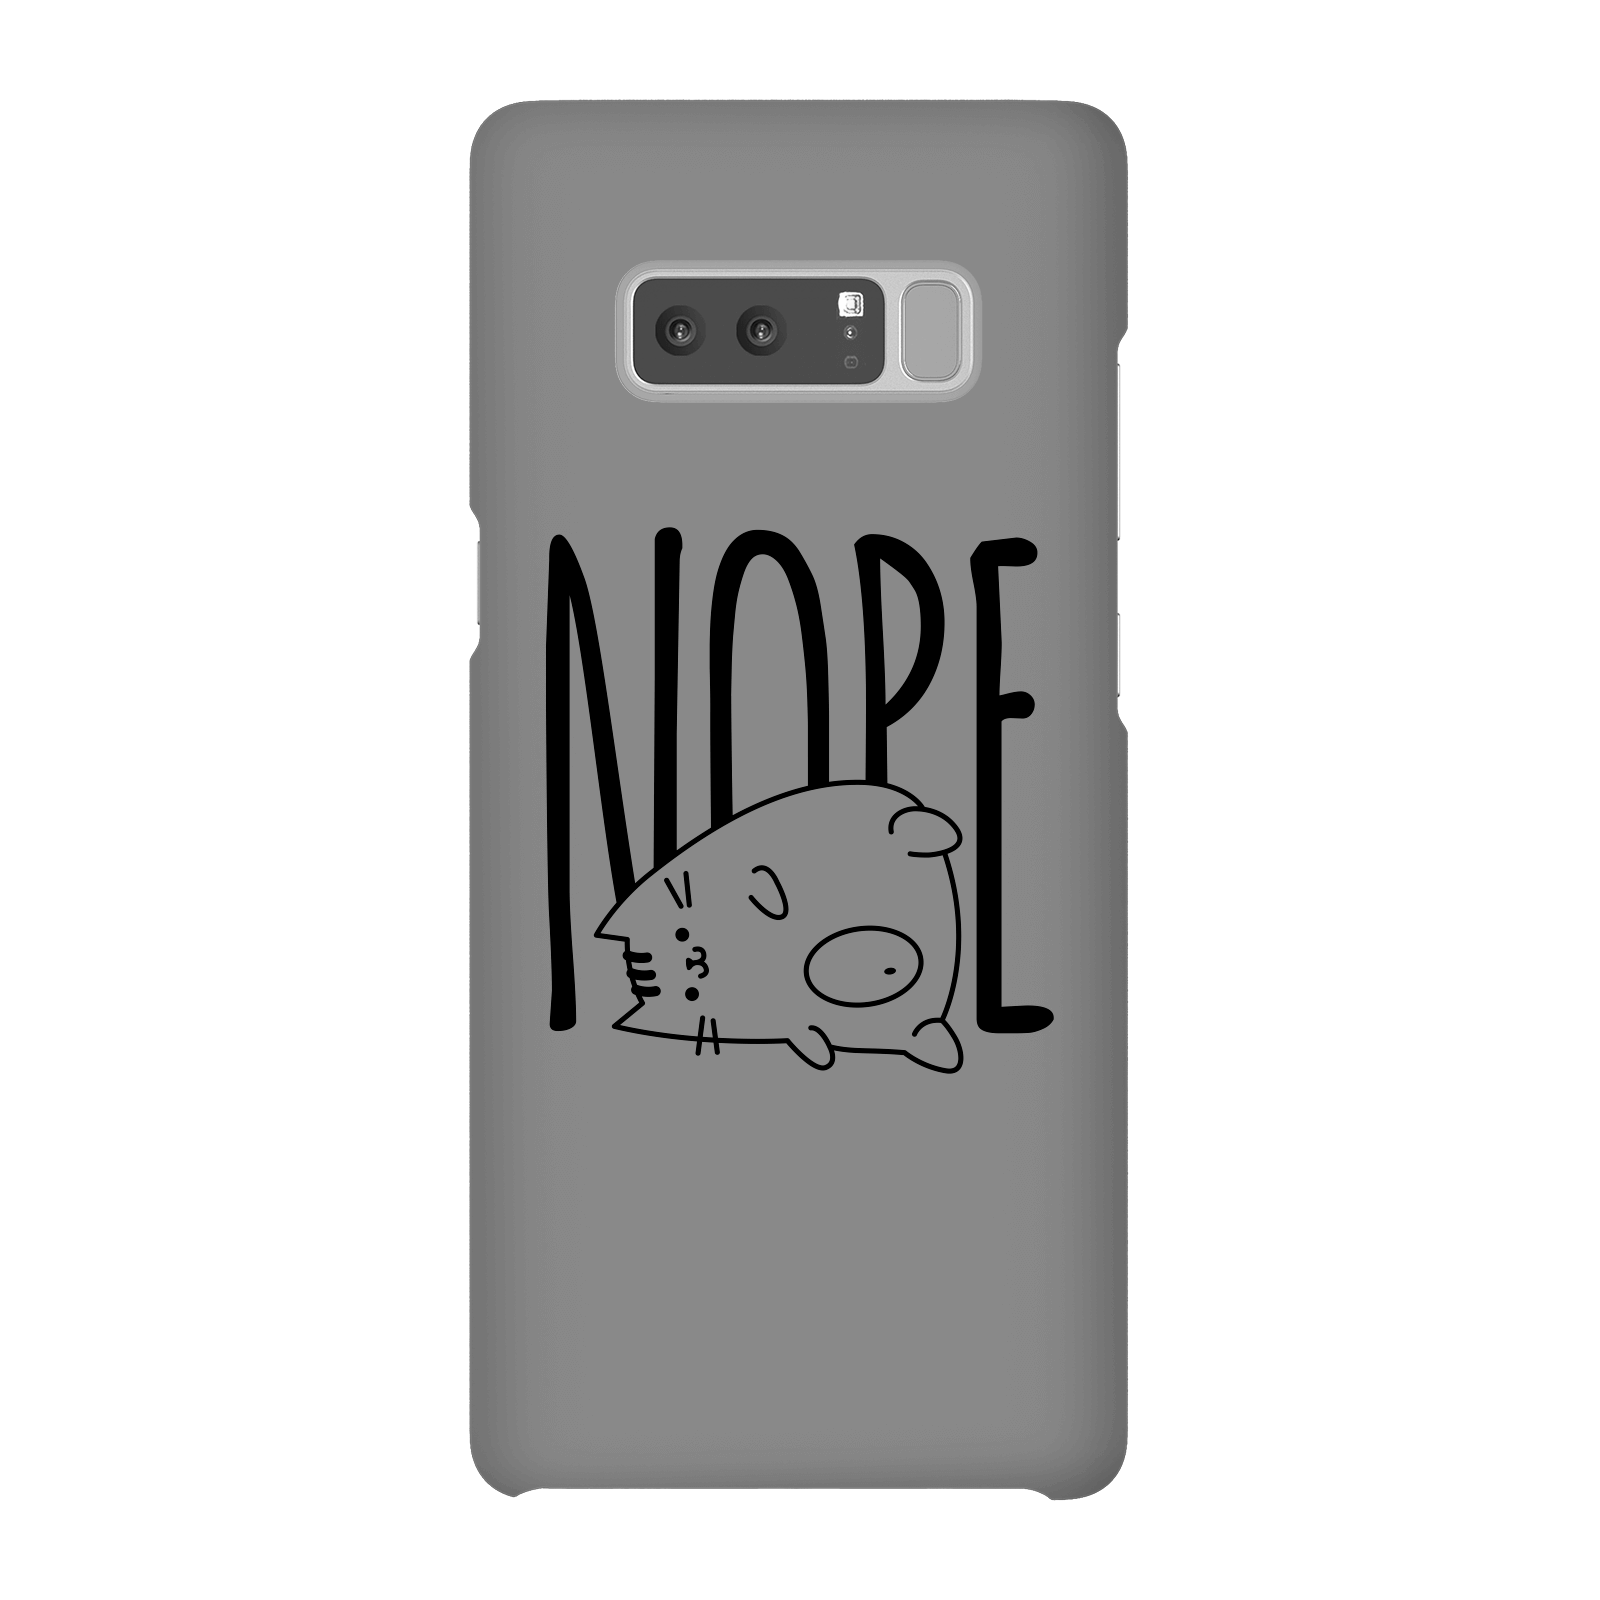 Nope Phone Case for iPhone and Android - Samsung Note 8 - Snap Case - Matte